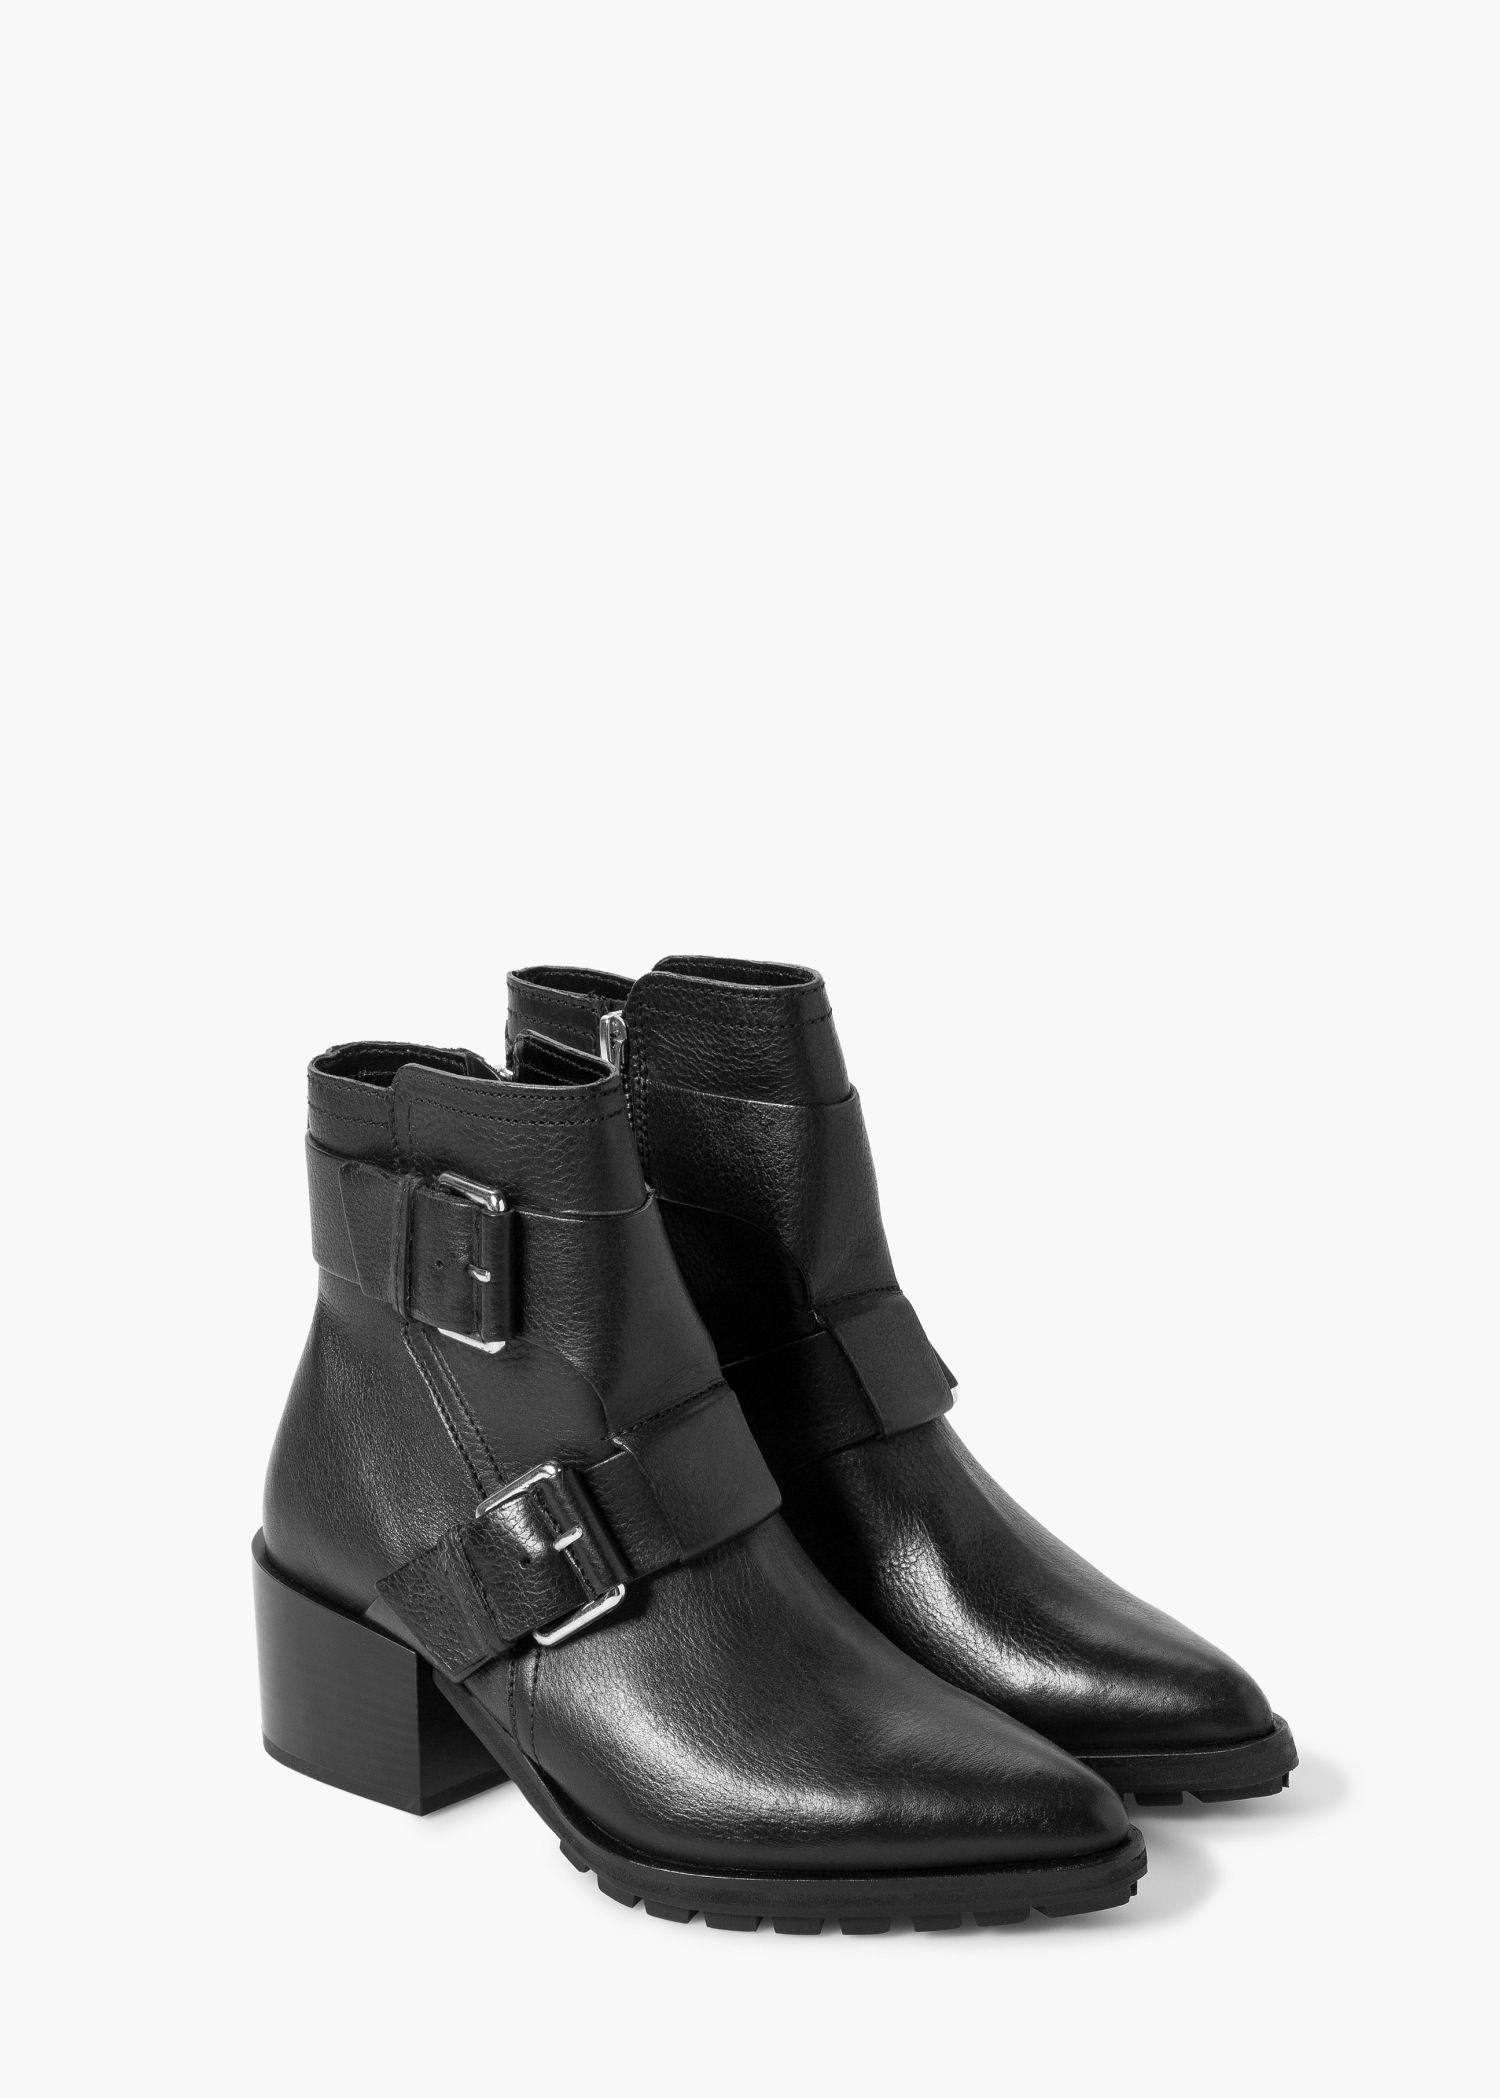 Lyst - Mango Buckle Leather Ankle Boots in Black